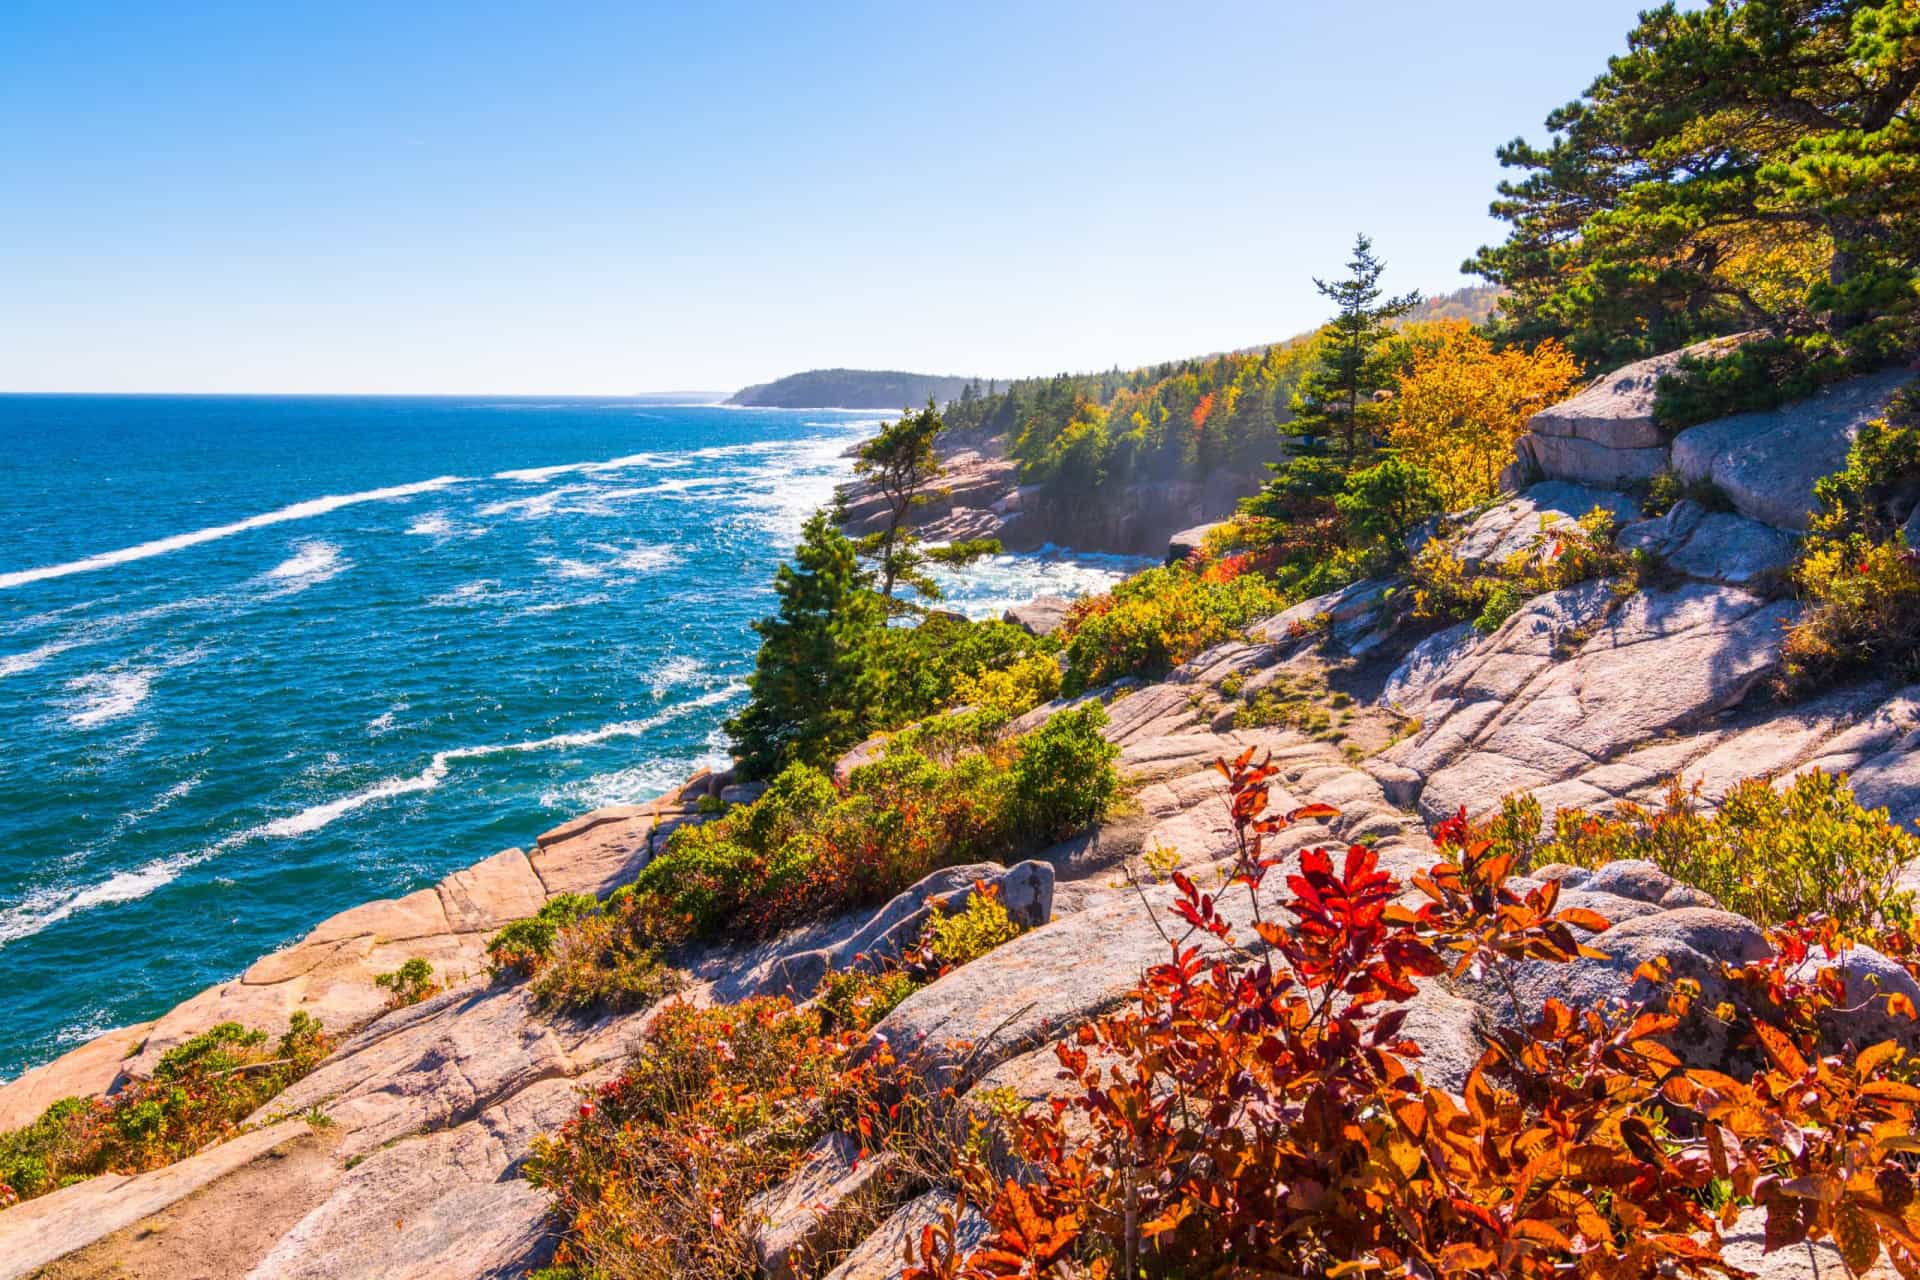 <p>A trip to Acadia National Park is a great way for a Virgo to get out of their comfort zone. They will be smitten by the beautiful nature and the well-constructed paths for hiking and biking.</p>